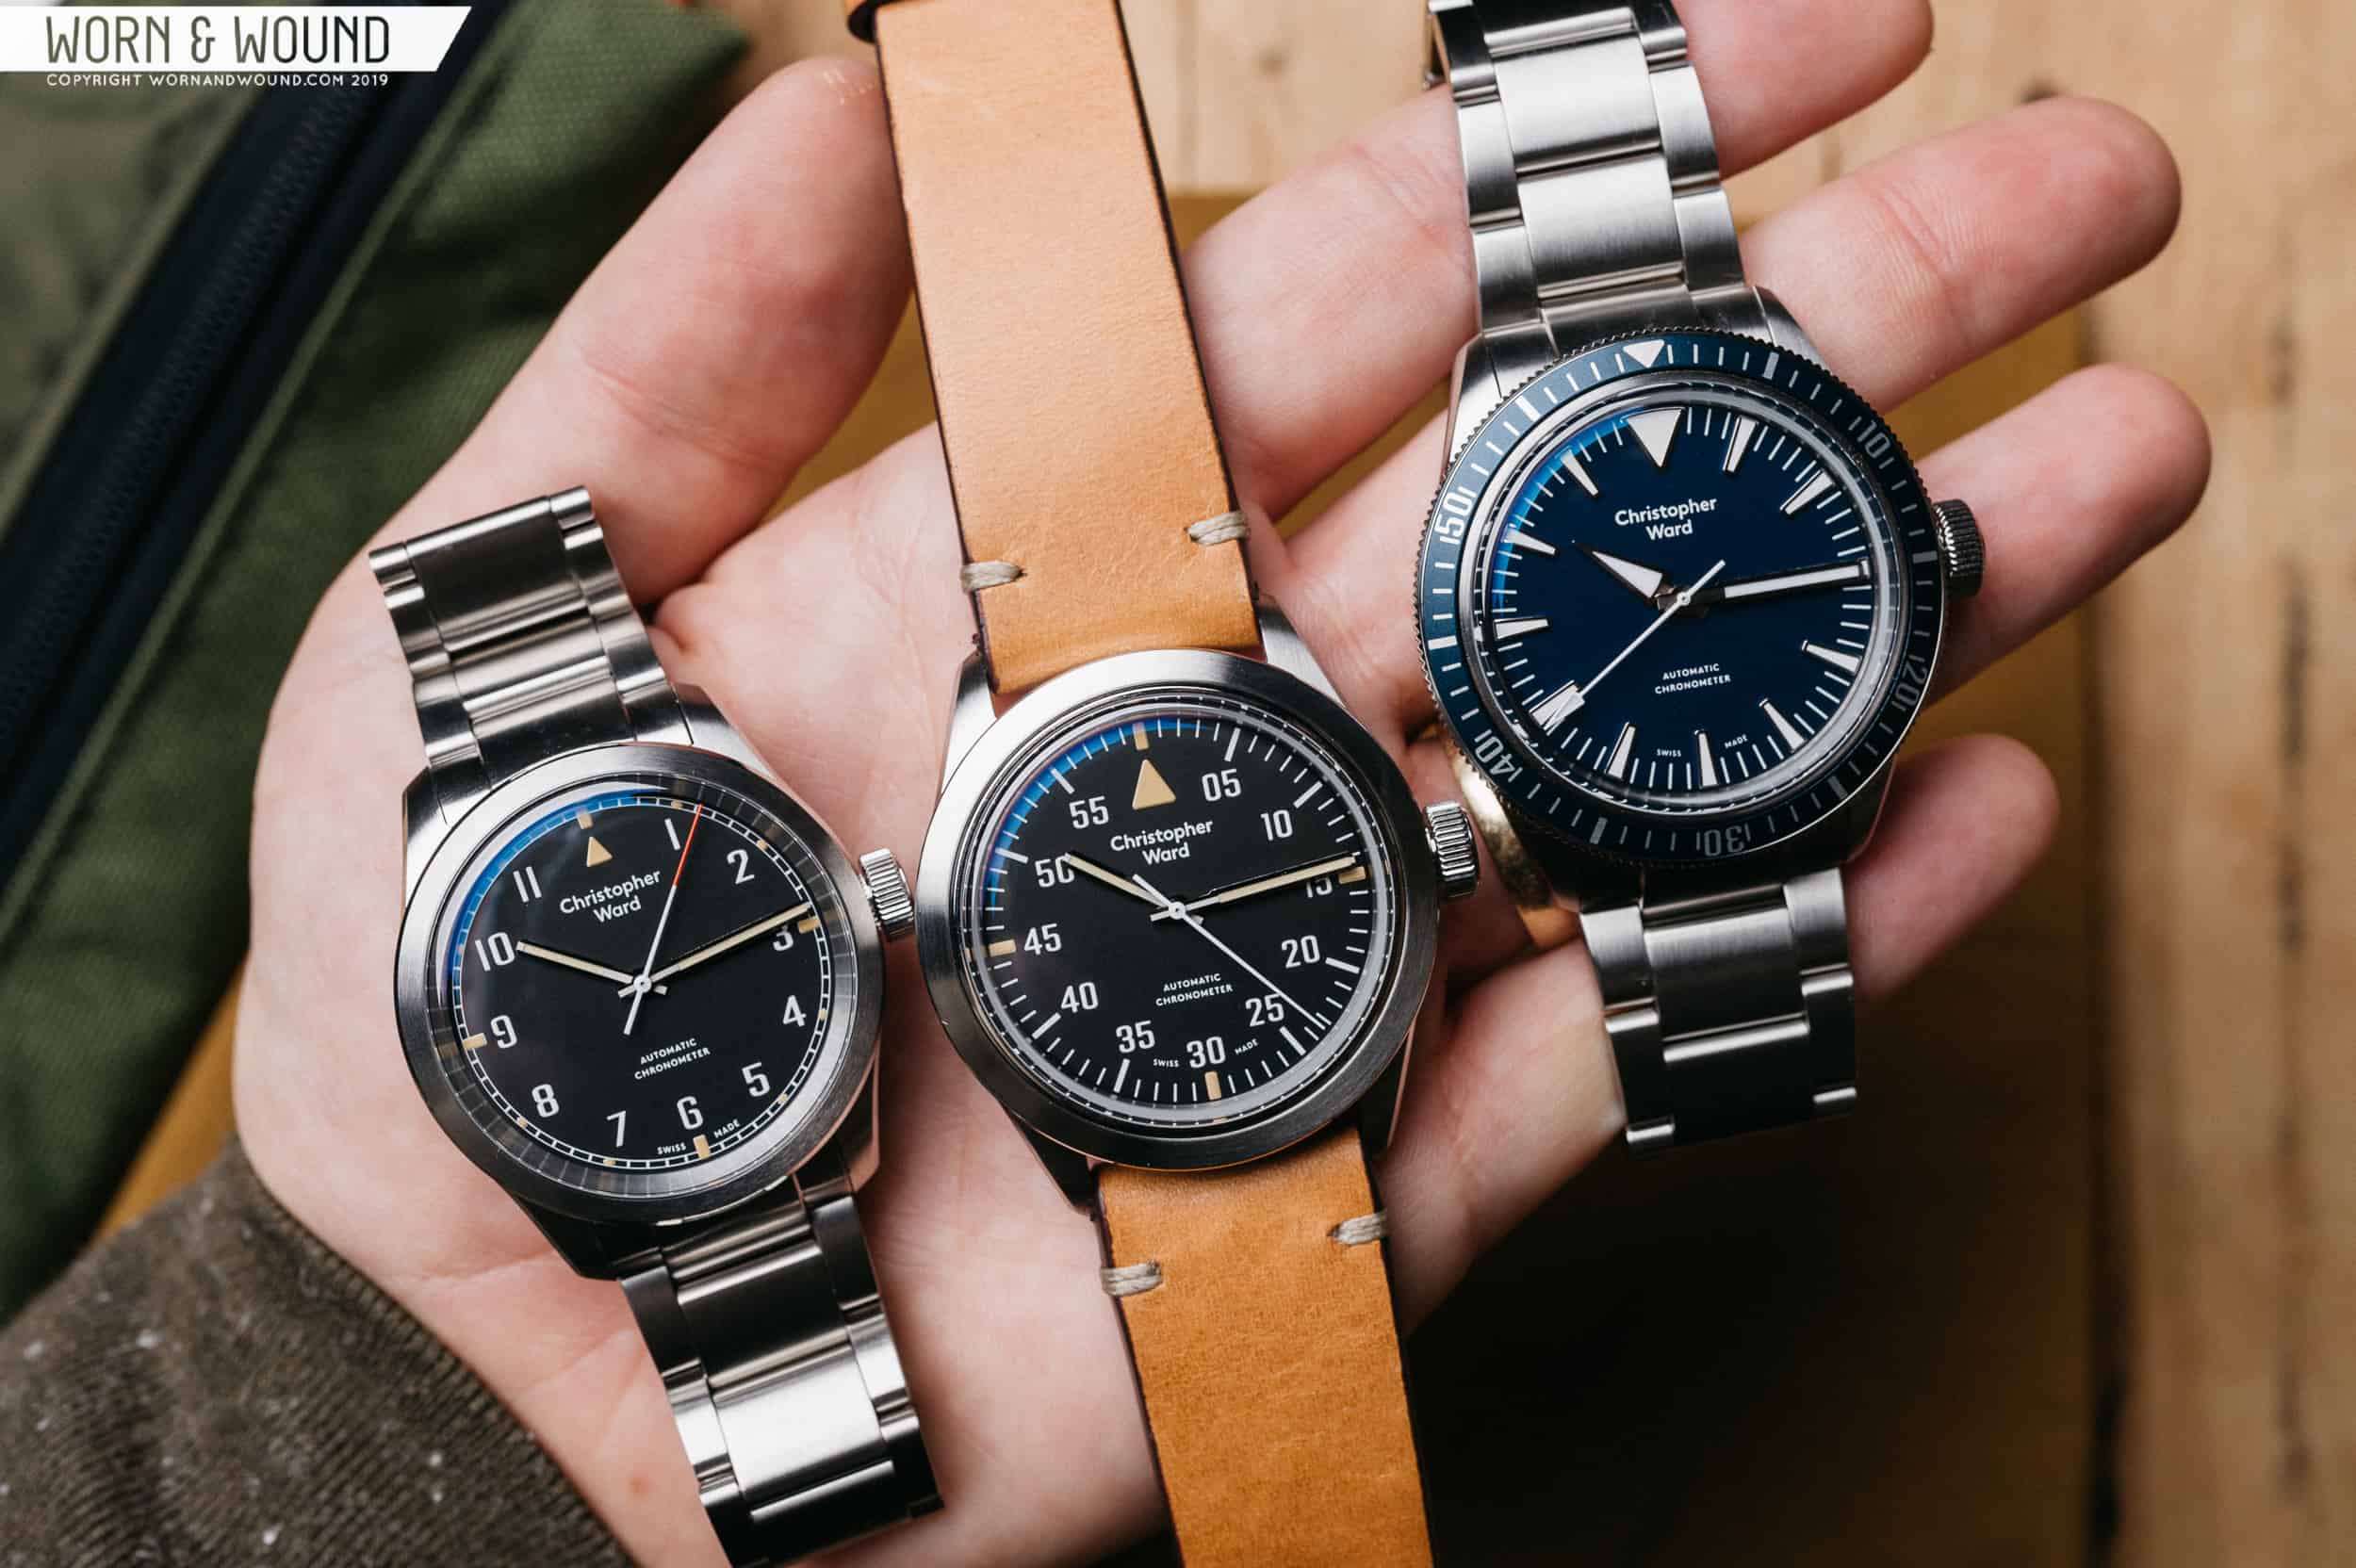 Recapping 2019: Our 10 Favorite Watch Reviews of the Year